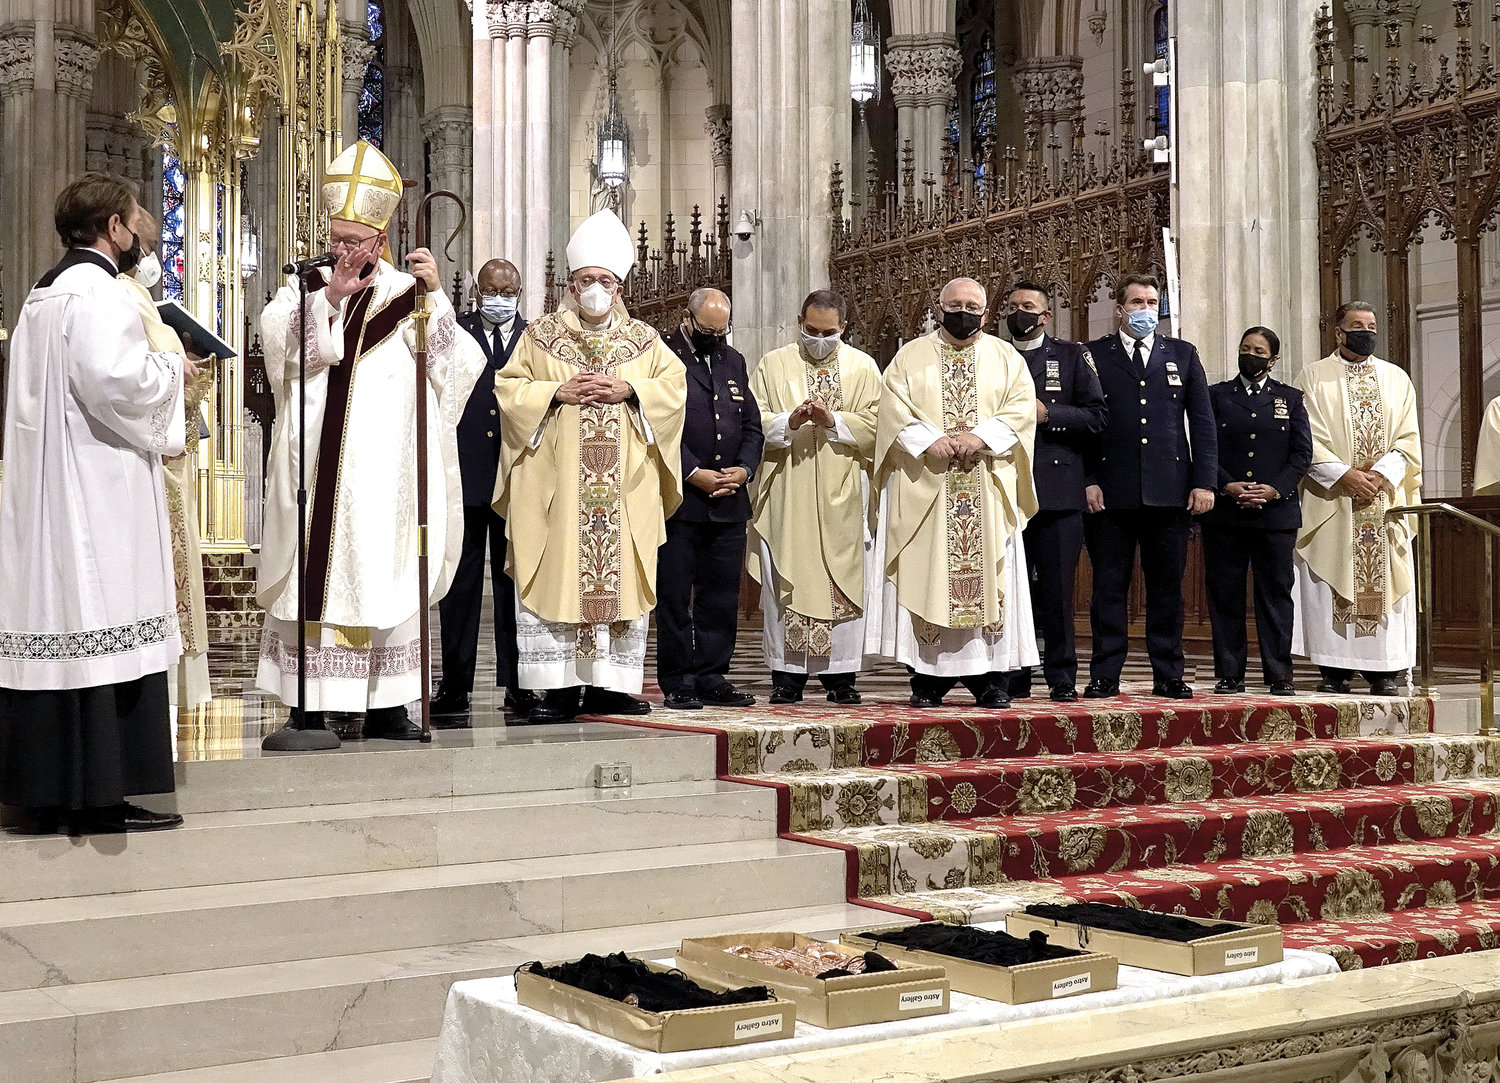 Cardinal Dolan served as the principal celebrant and homilist at a Memorial Mass Oct. 5 at St. Patrick’s Cathedral for 46 NYPD officers and other employees who have died of the coronavirus. The cardinal blessed the Guardian Angel medallions distributed at the end of Mass.